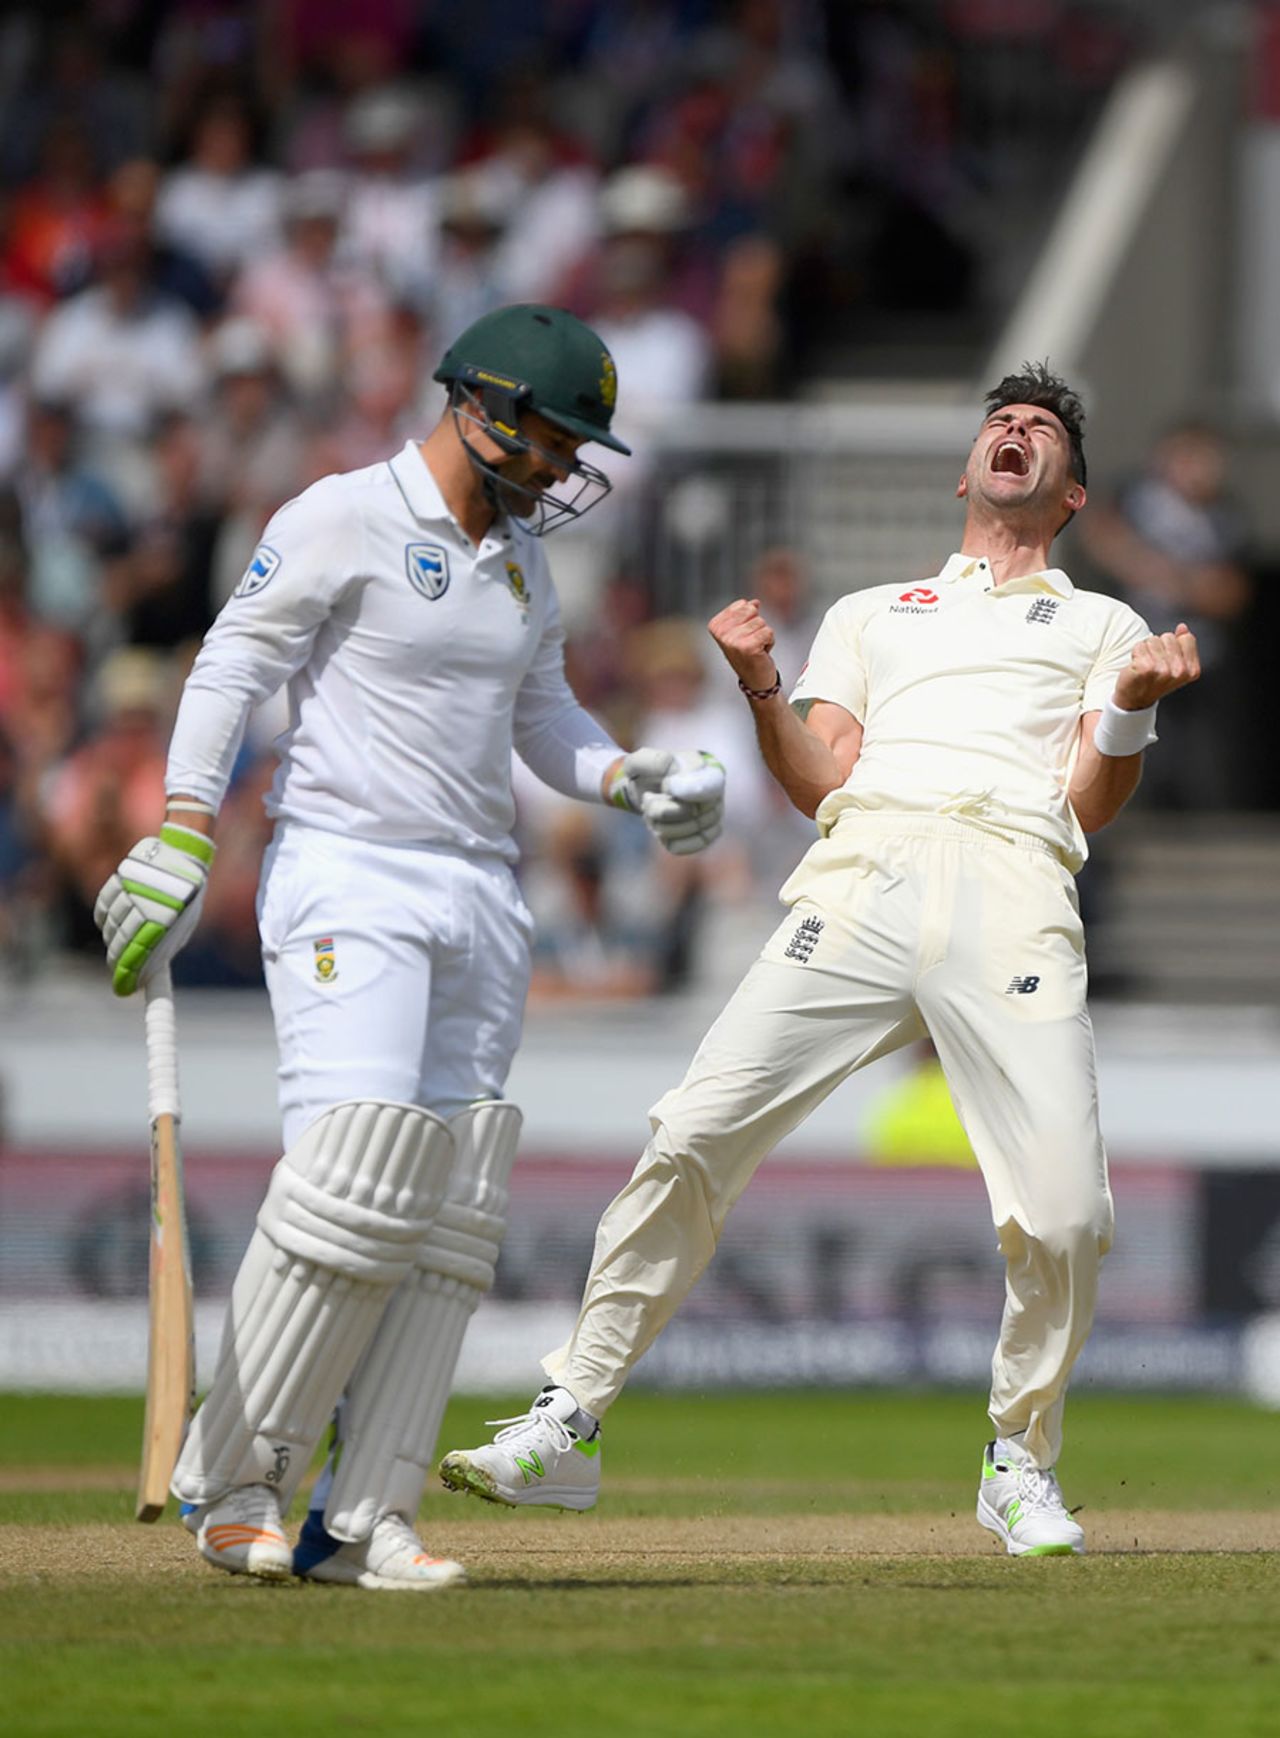 James Anderson struck in his first over from his own end, England v South Africa, 4th Investec Test, Old Trafford, 2nd day, August 5, 2017